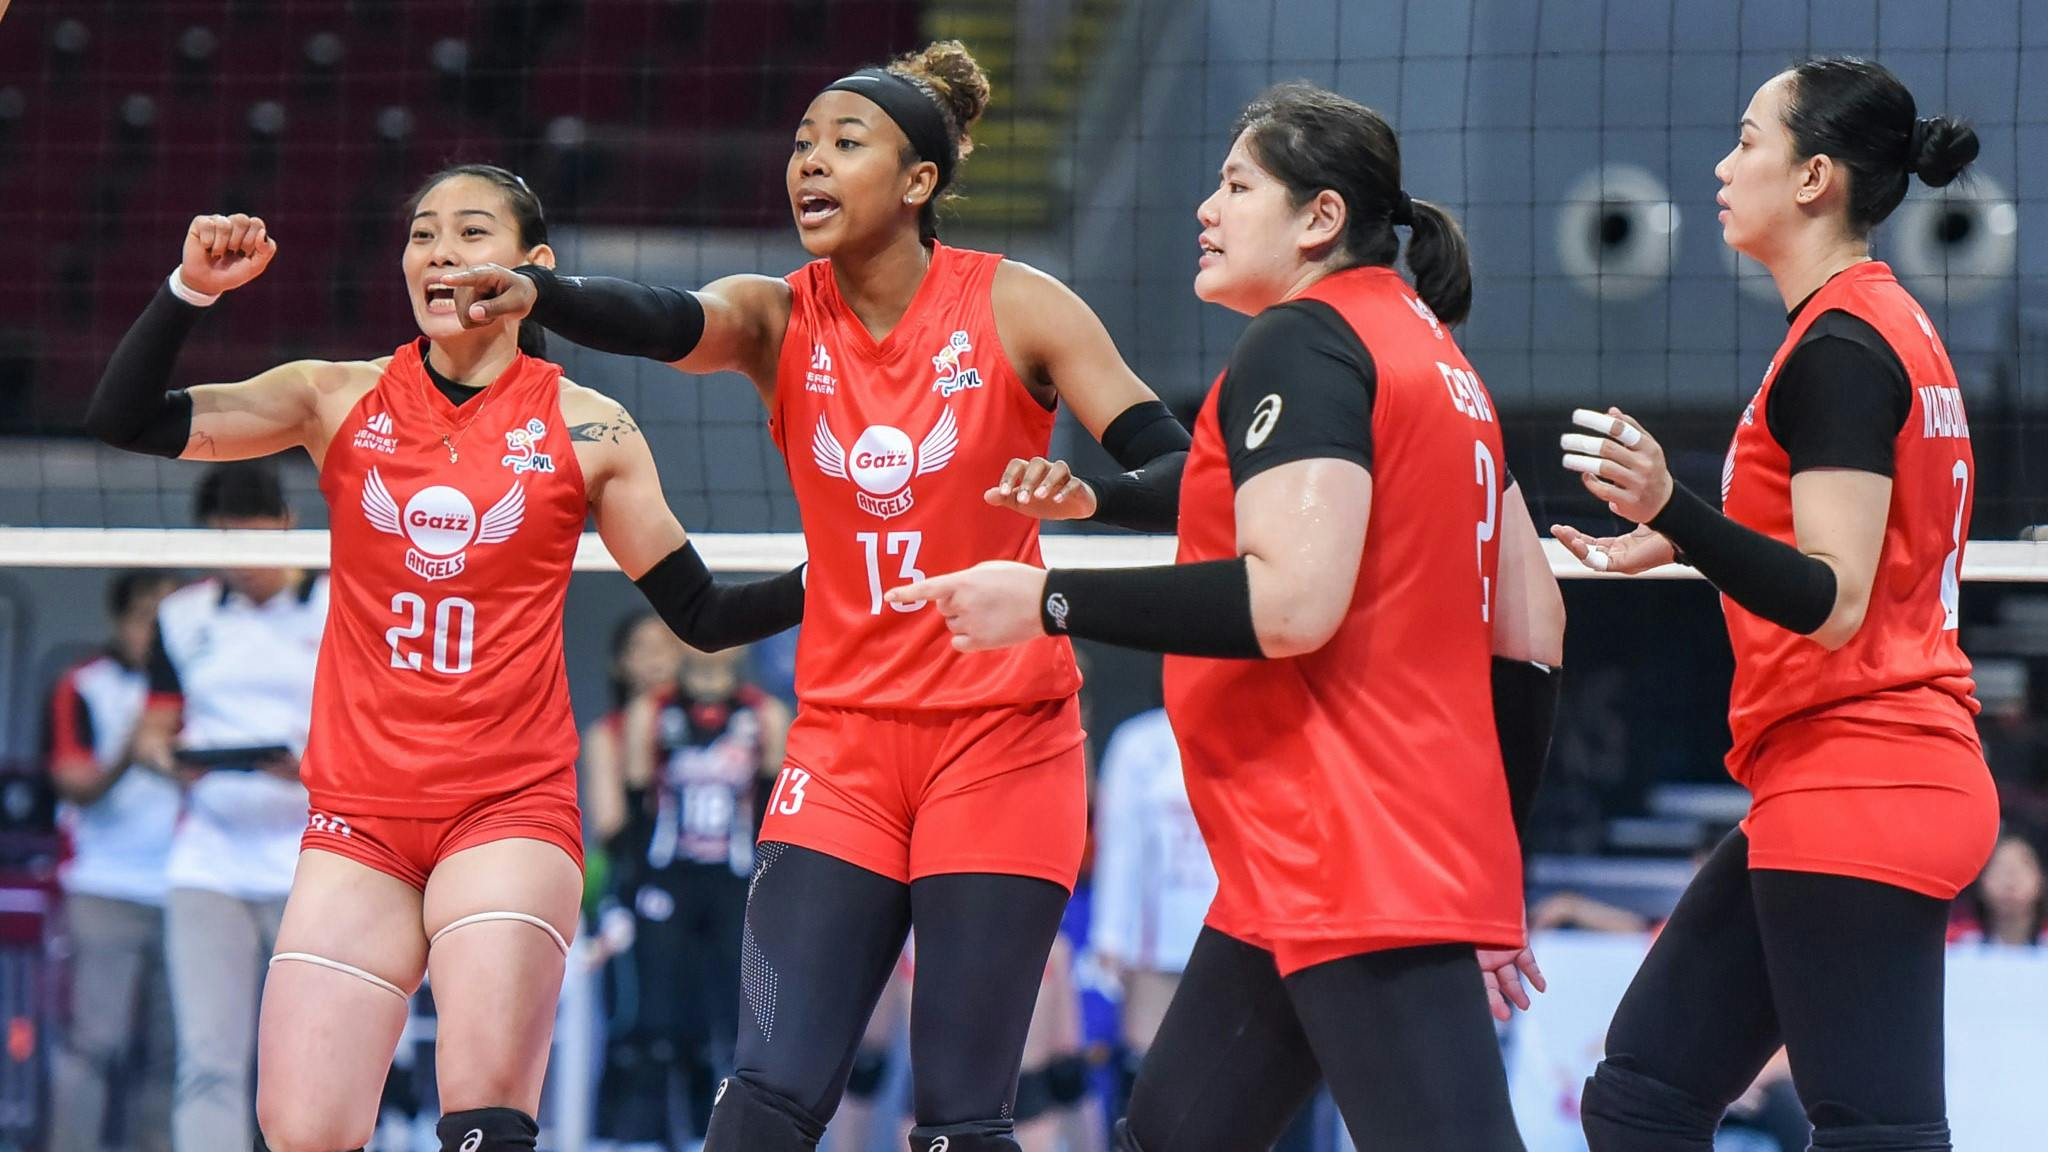 Ibang level: Oliver Almadro, Petro Gazz to work on physicality as women’s volleyball intensifies